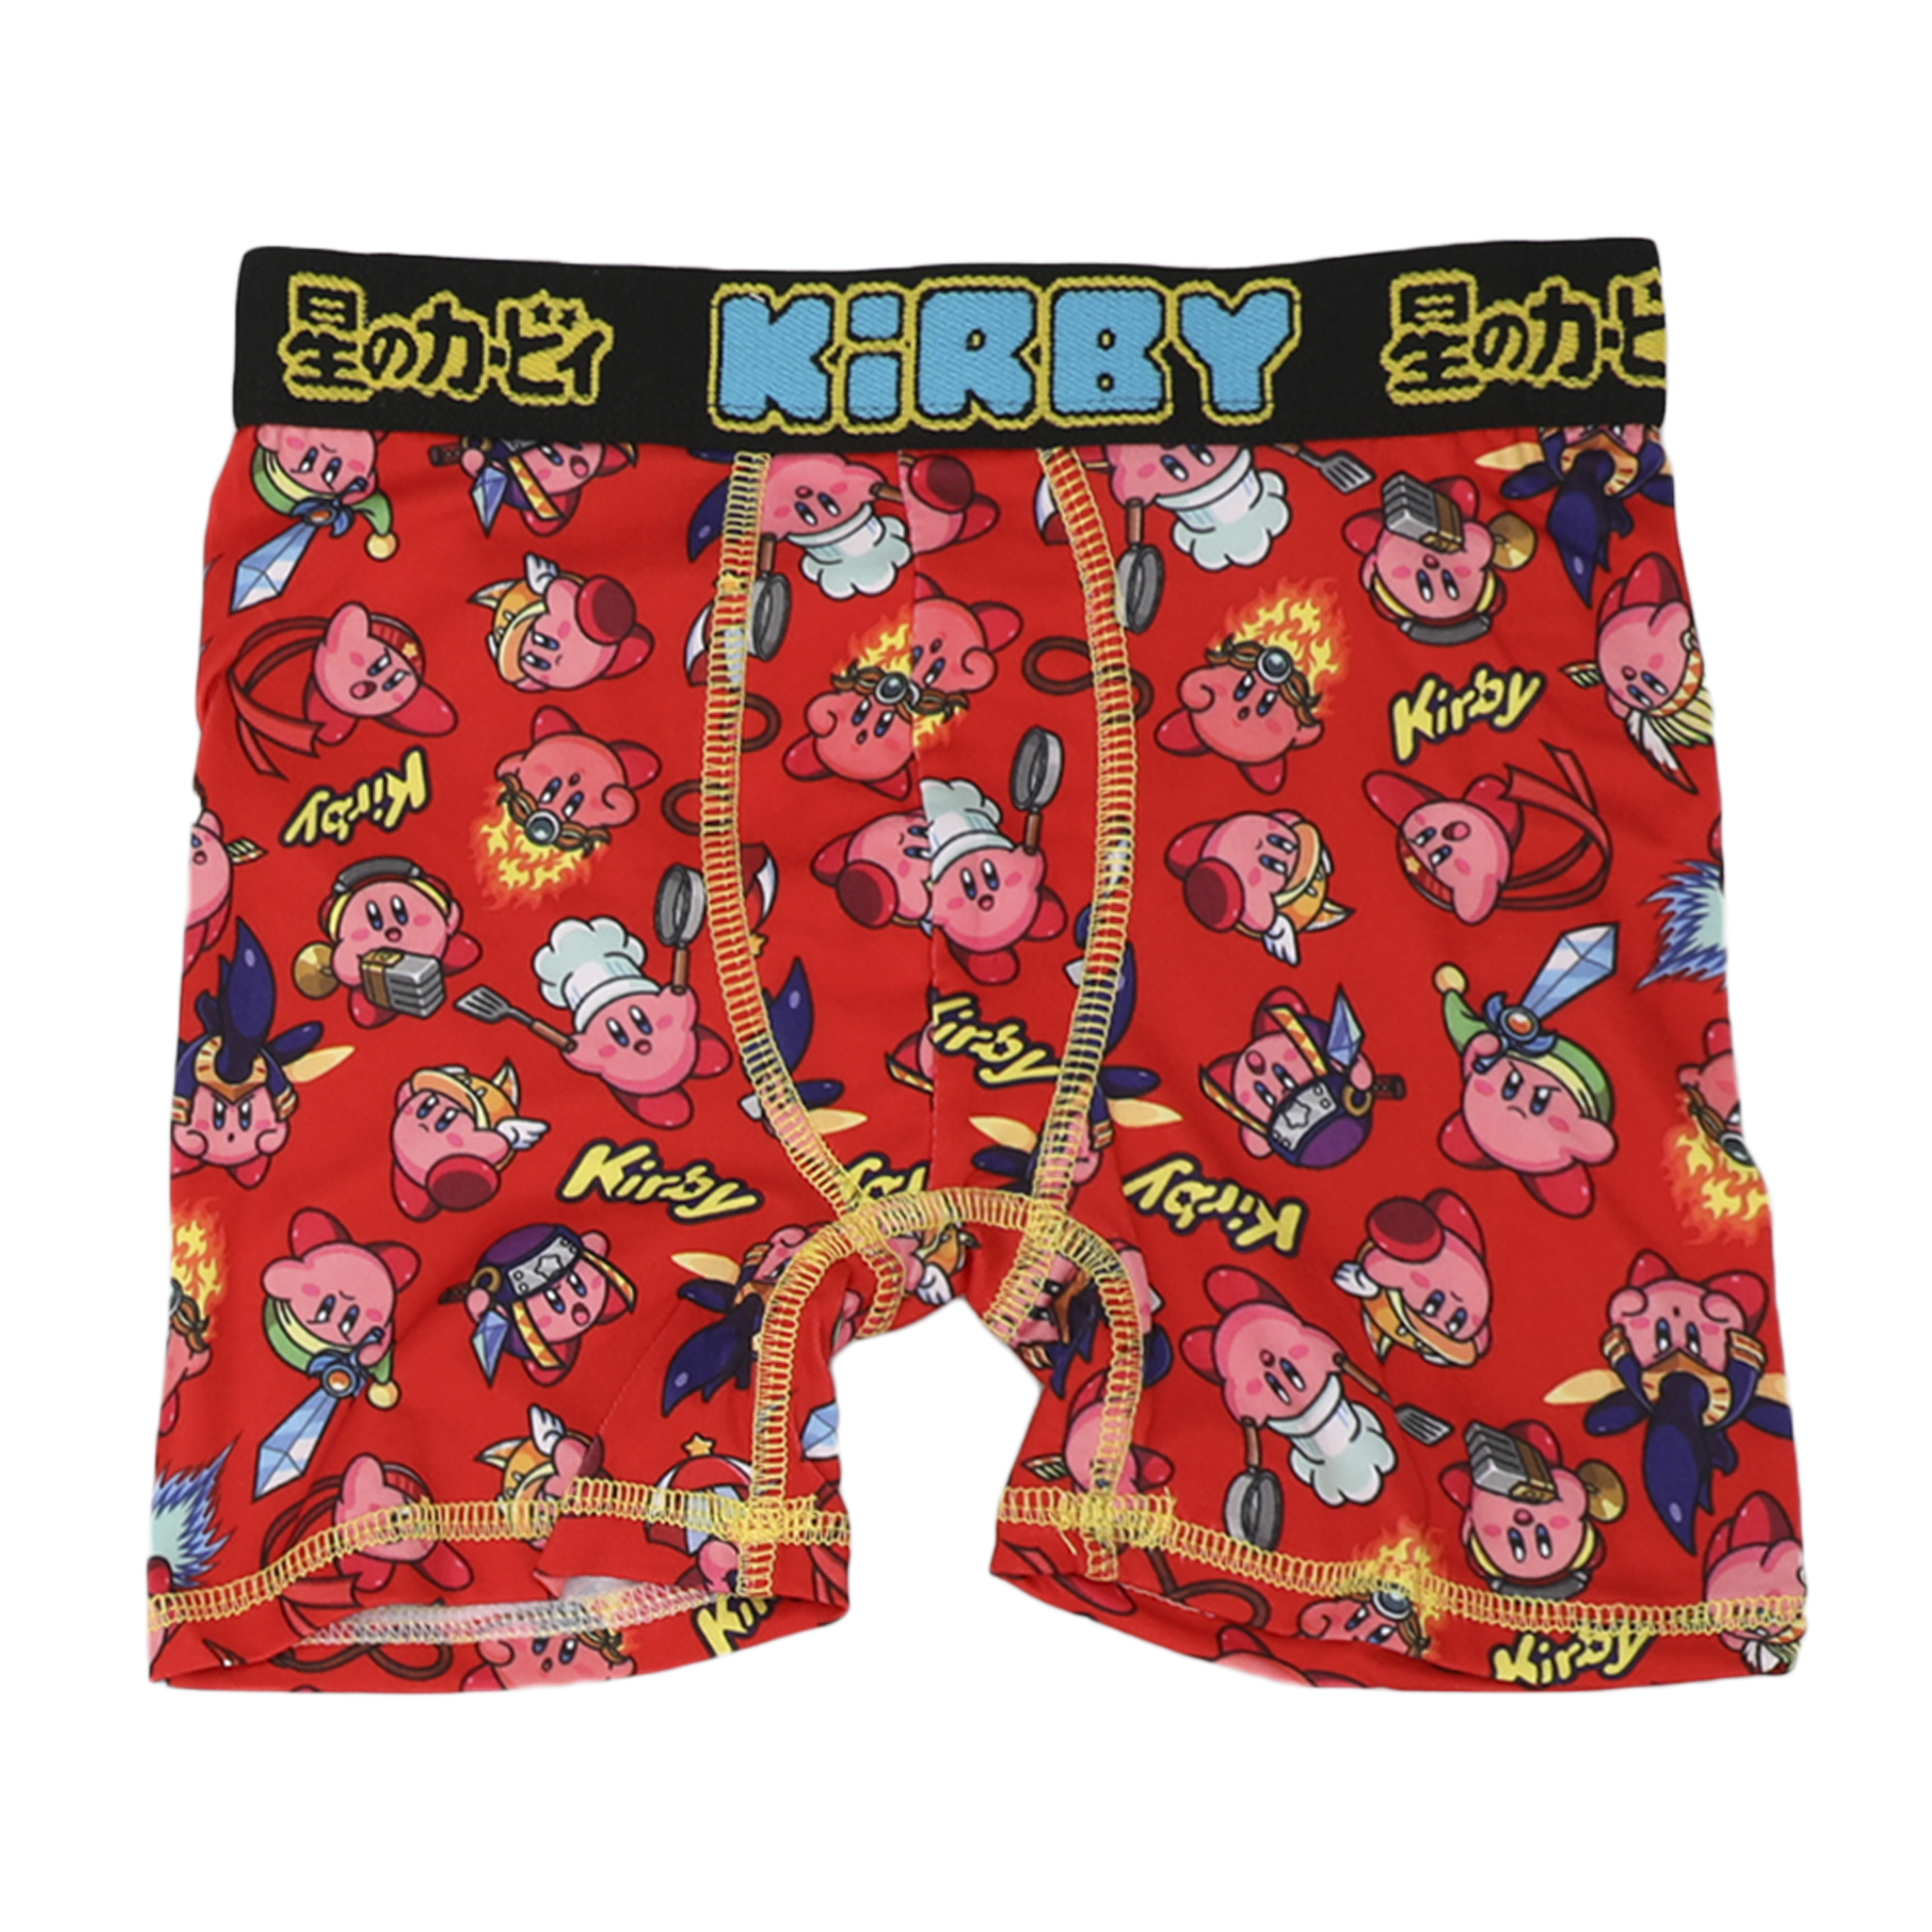 Kirby Characters & Power Ups 4-Pack Boy's Boxer Briefs-4 - image 4 of 5